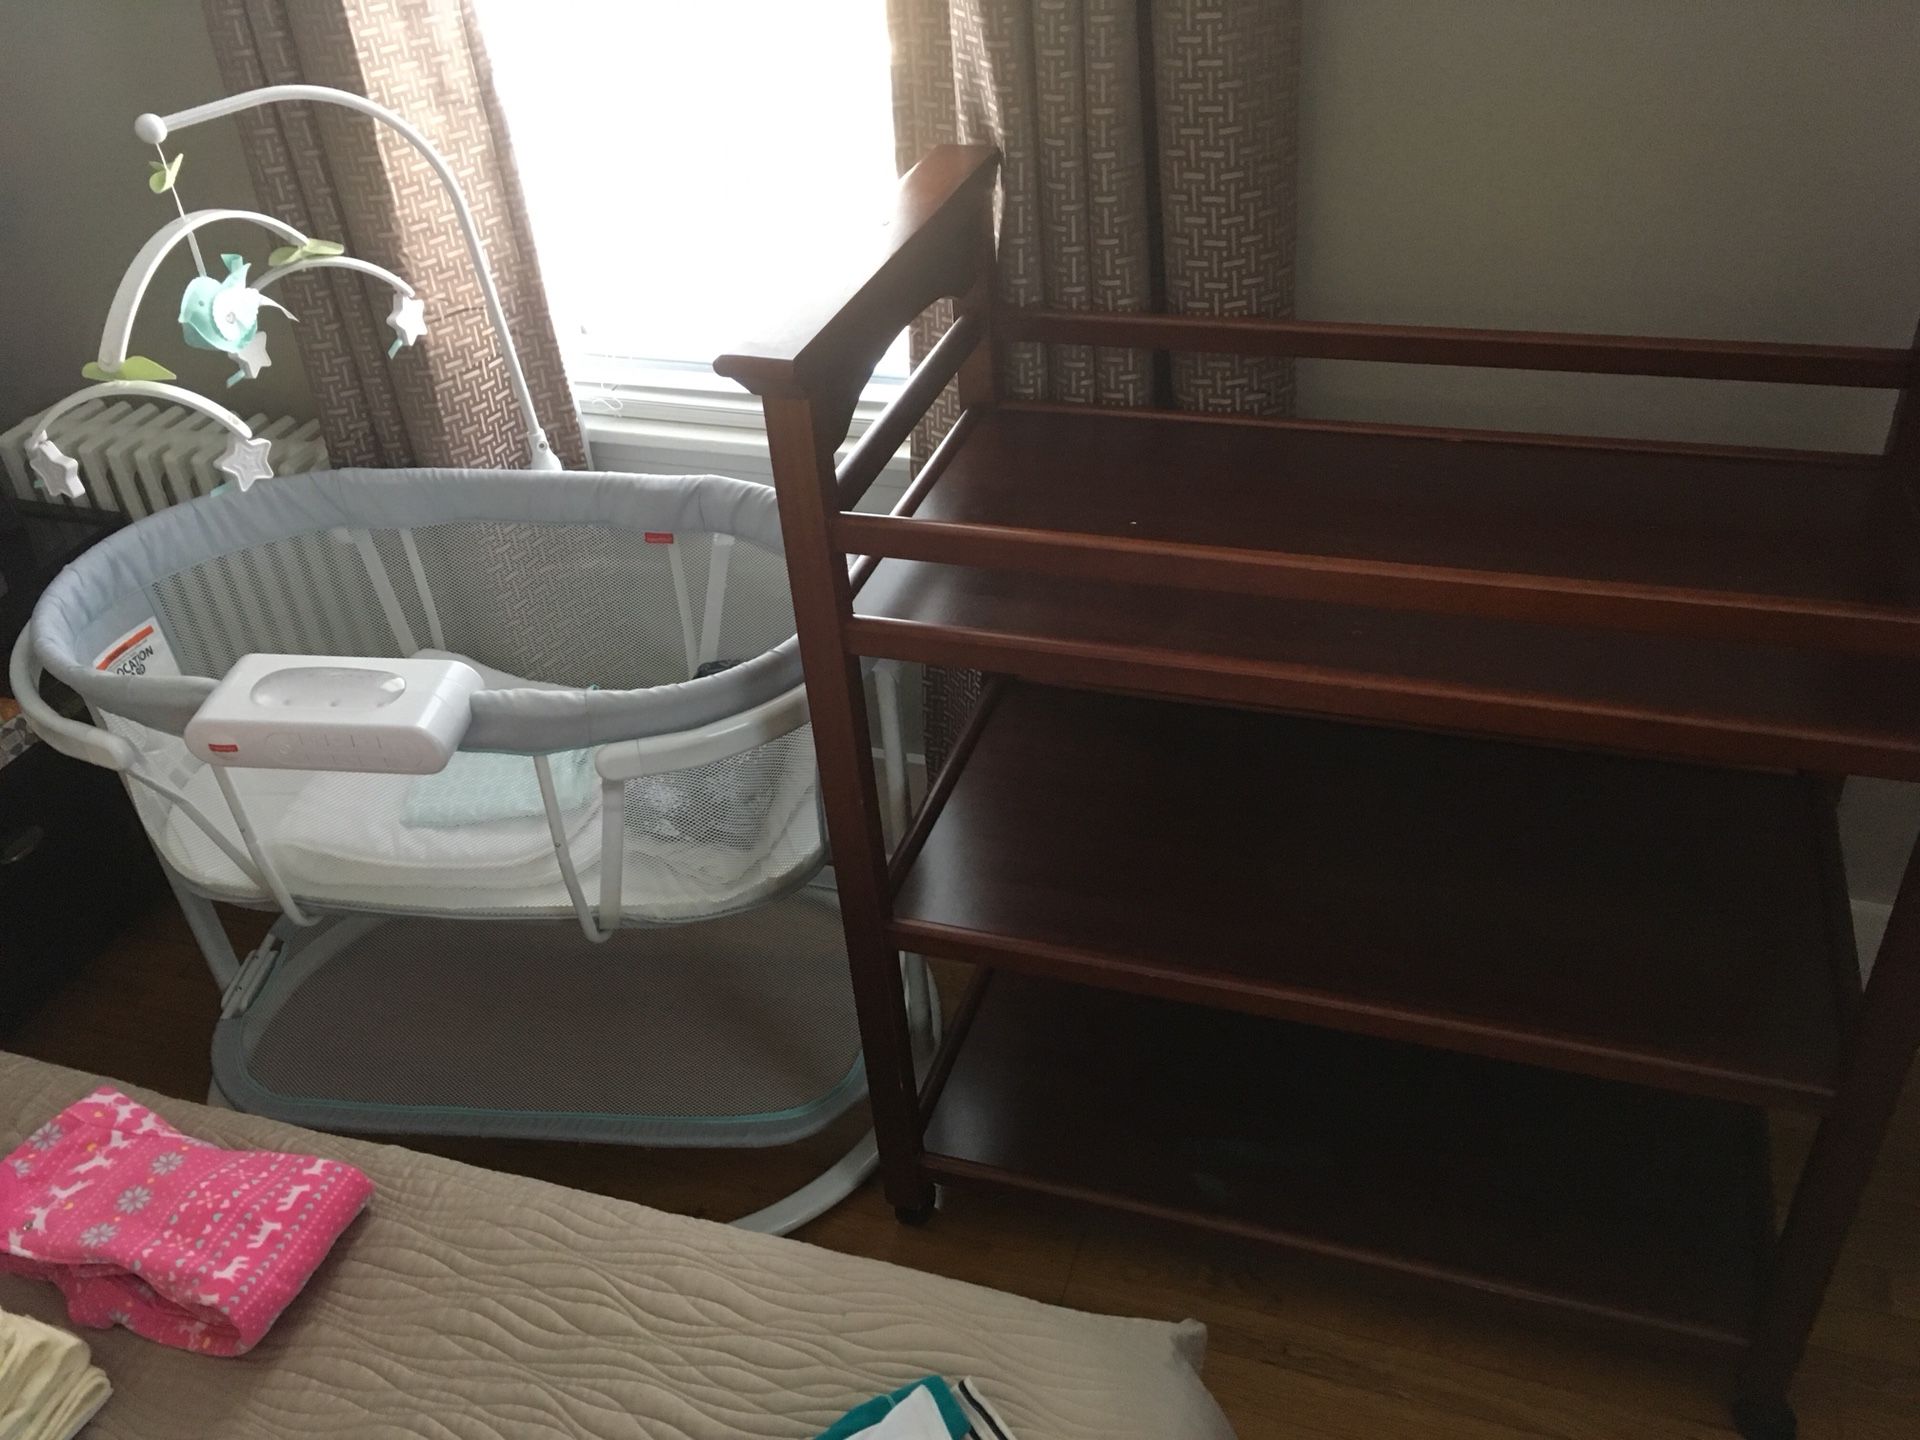 Changing table AND the bassinet